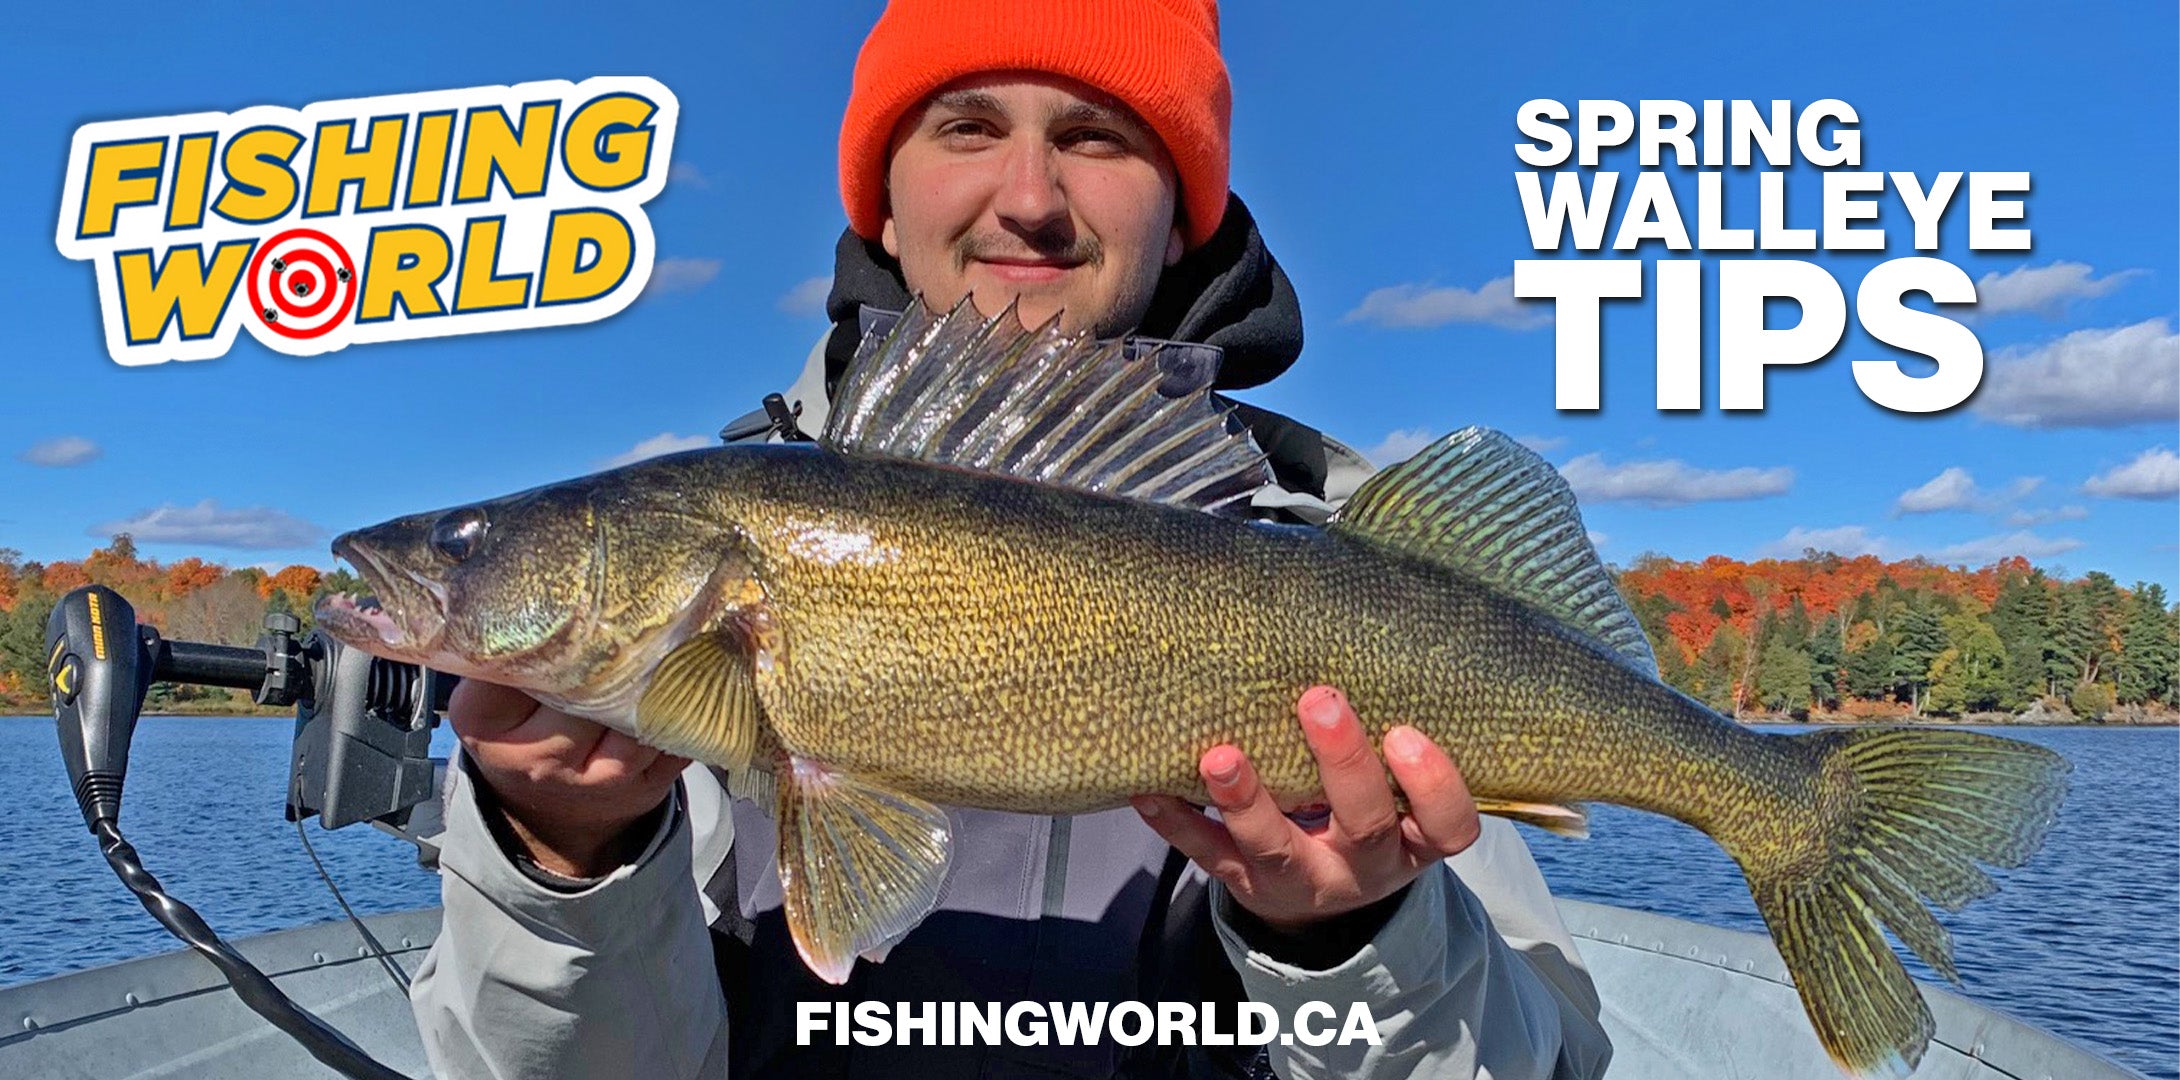 Trolling spoons to find fish fast – Target Walleye